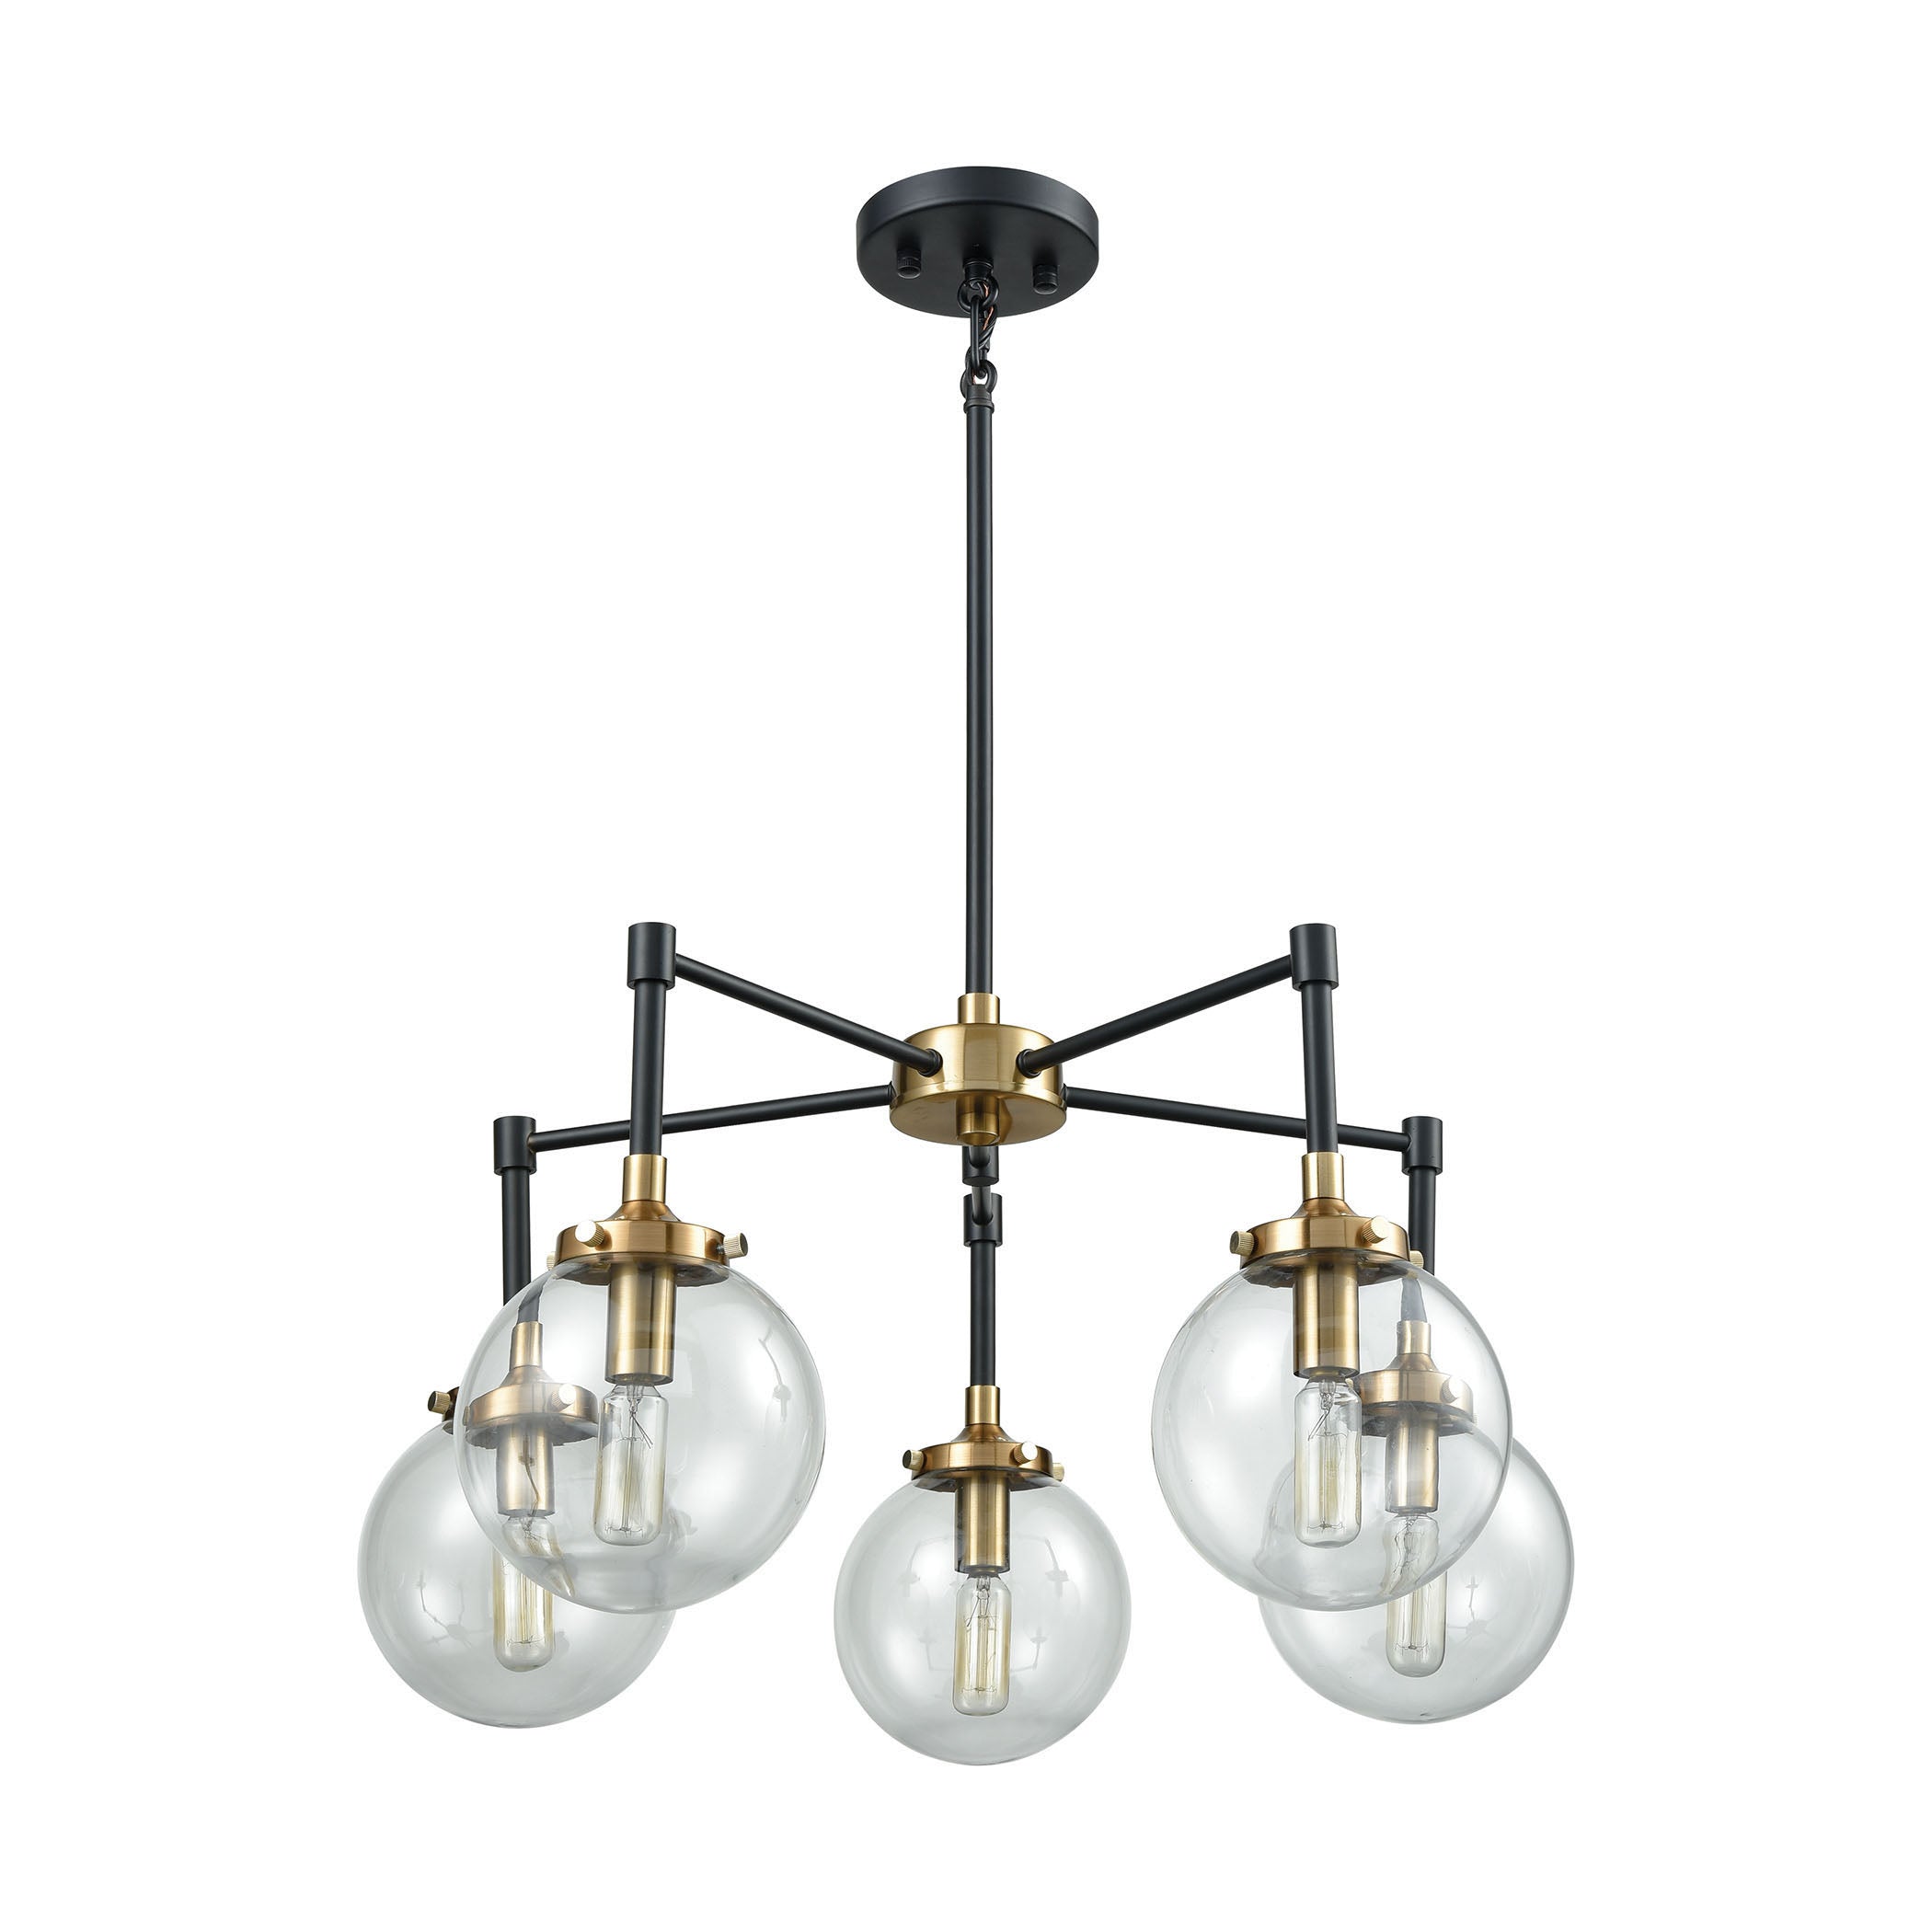 ELK Lighting 14437/5 Boudreaux 5-Light Chandelier in Matte Black and Antique Gold with Sphere-shaped Glass